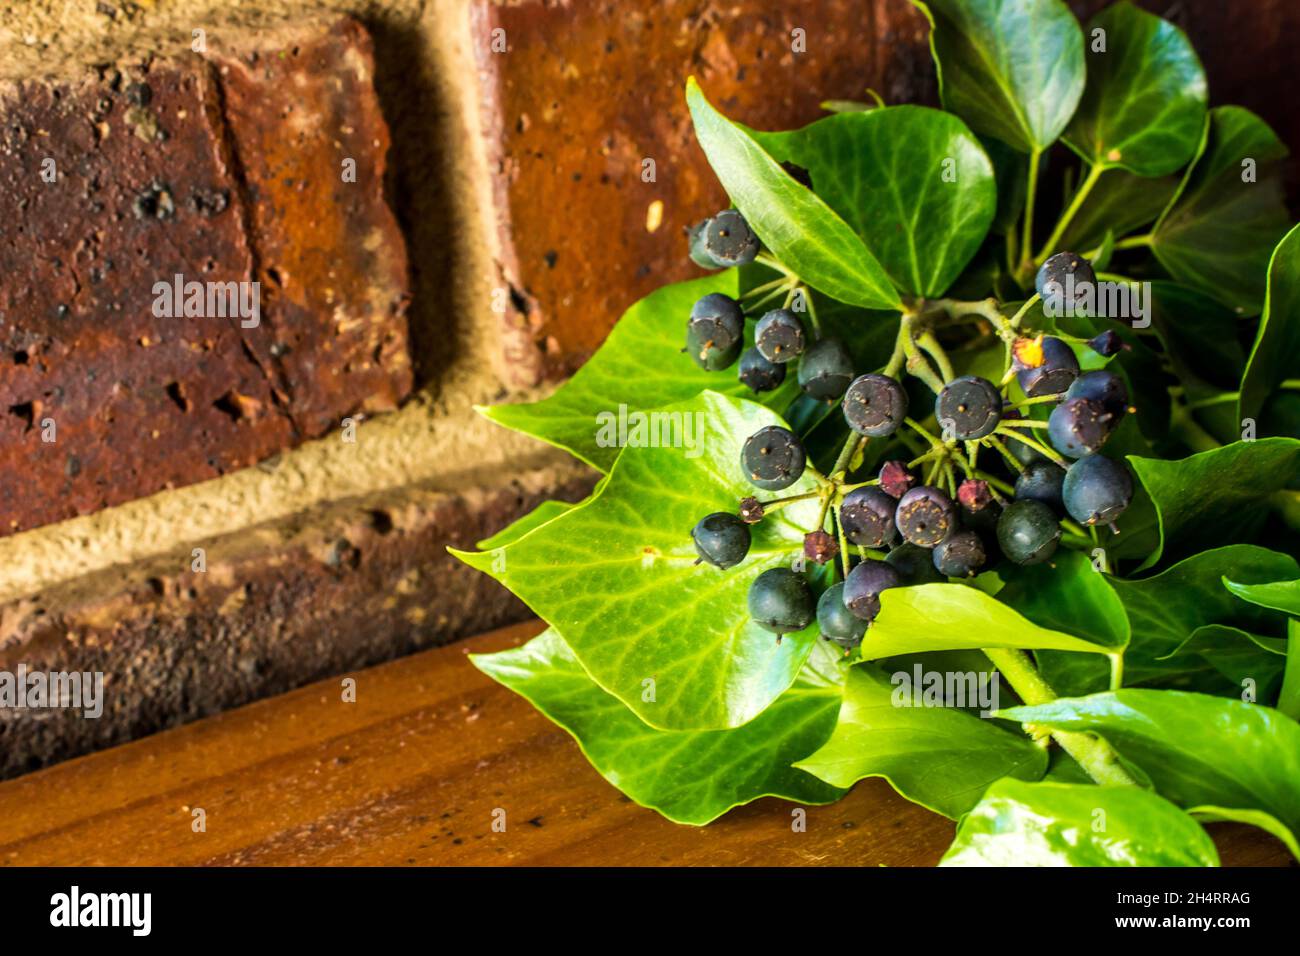 An Ivy branch, with Bluish black Berries, on a wooden table against a brick background Stock Photo